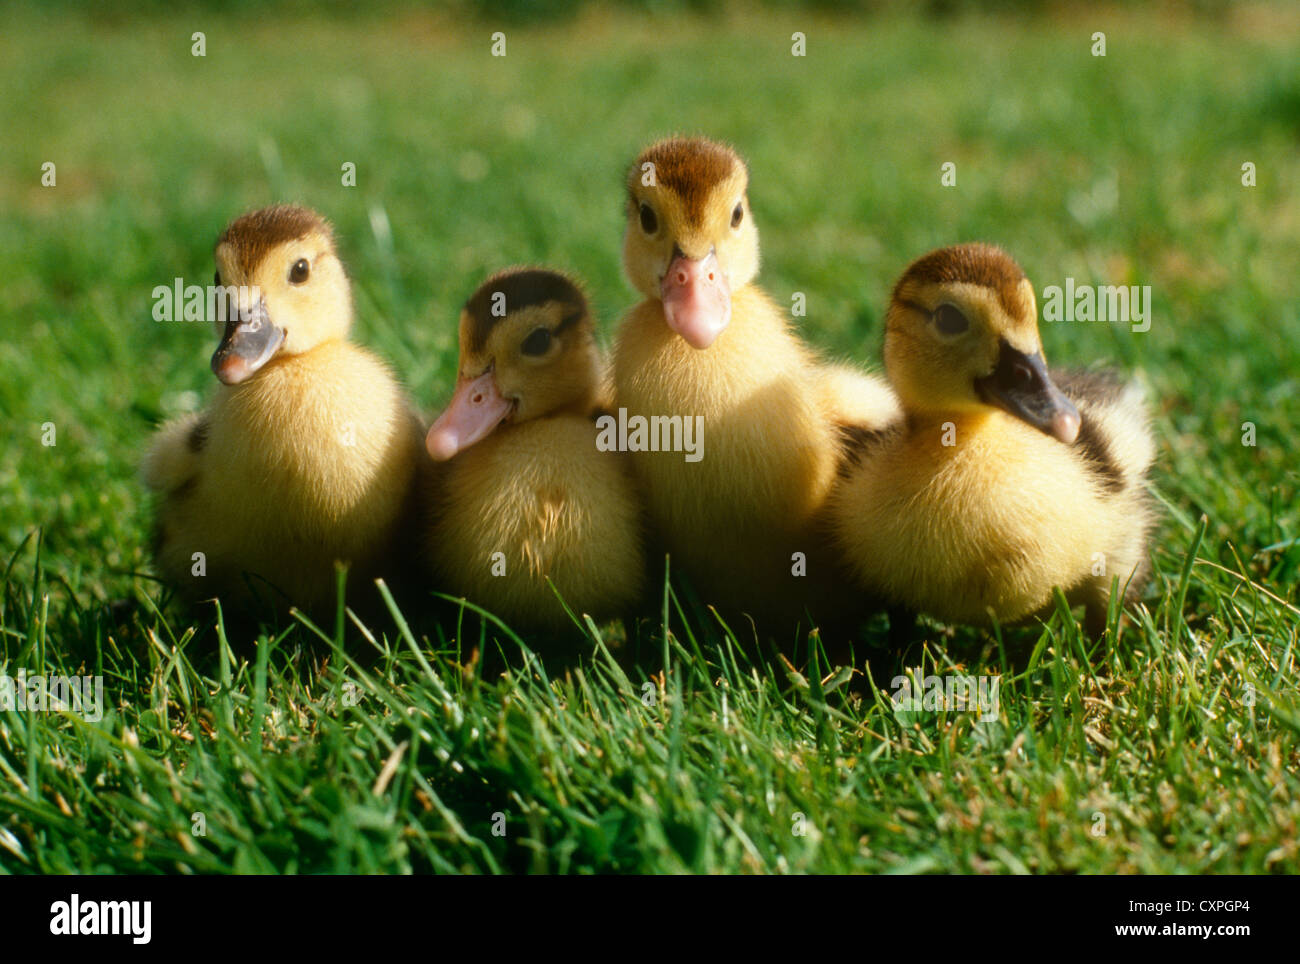 Four cute ducklings outdoors Stock Photo